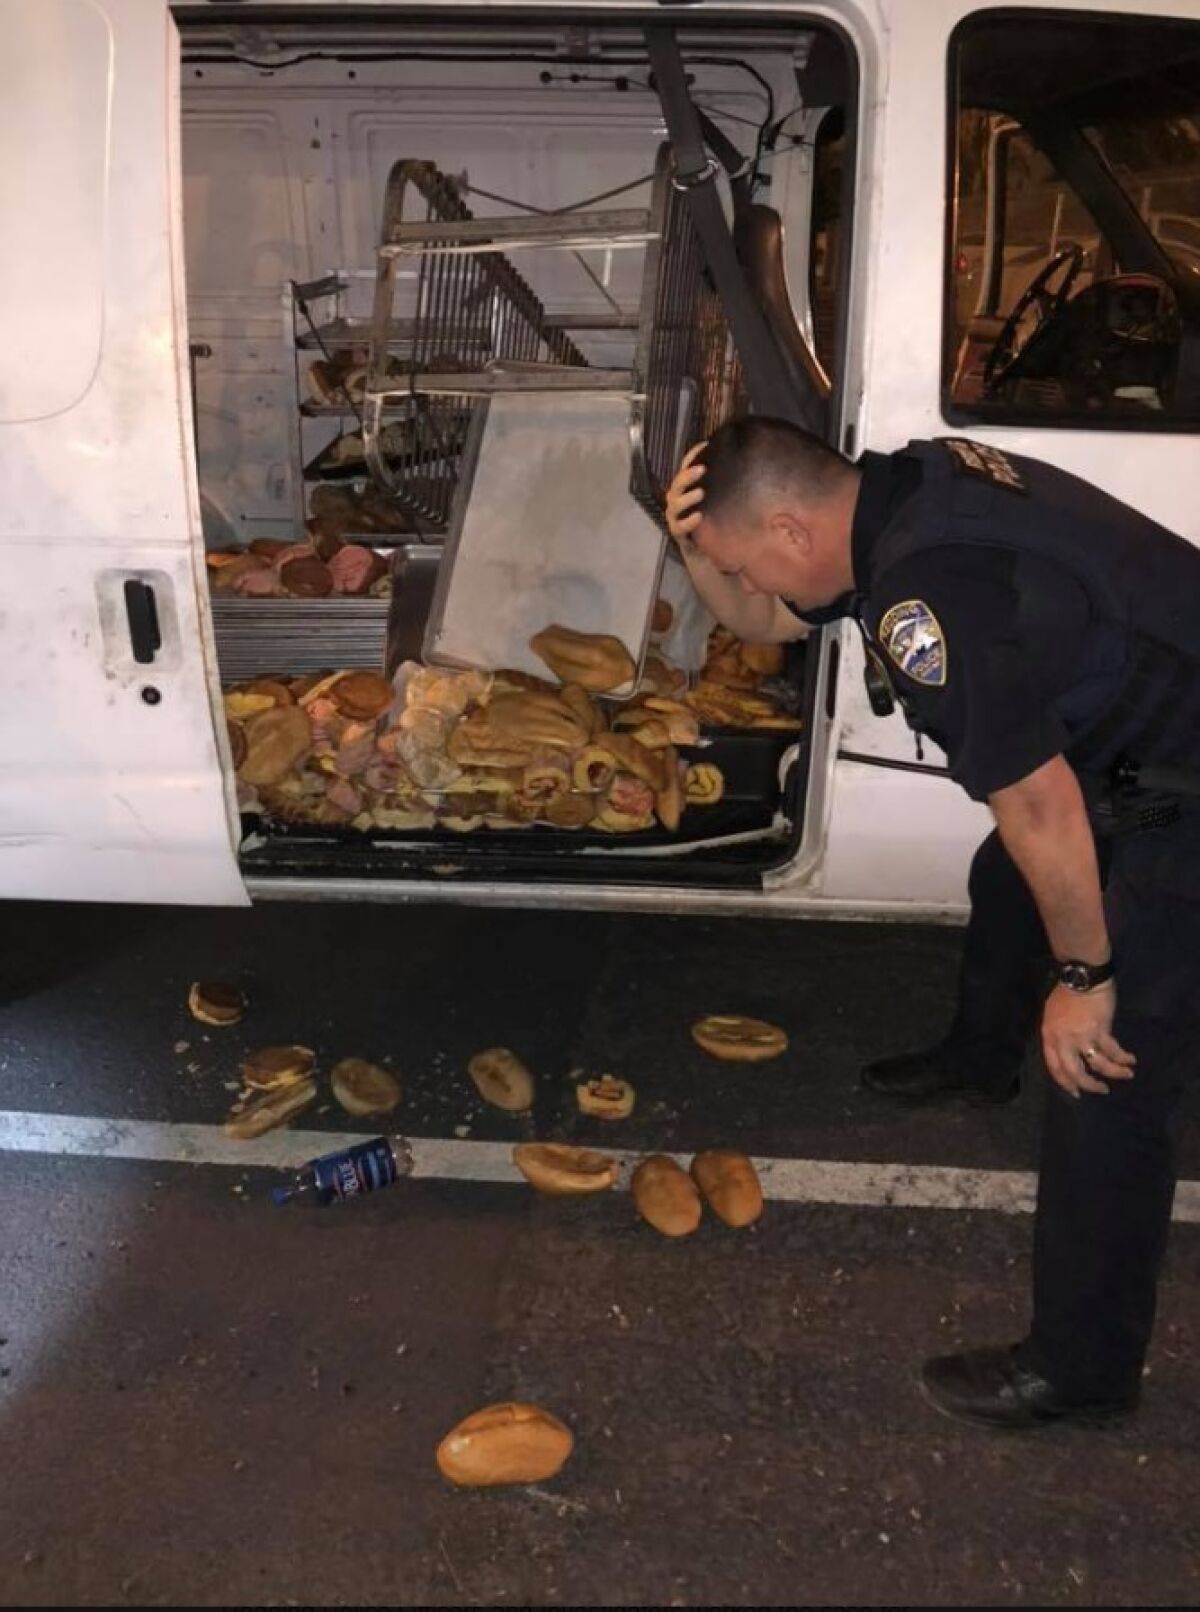 Police in Redding discovered dozens of discarded pastries inside a stolen bakery truck early Thursday.